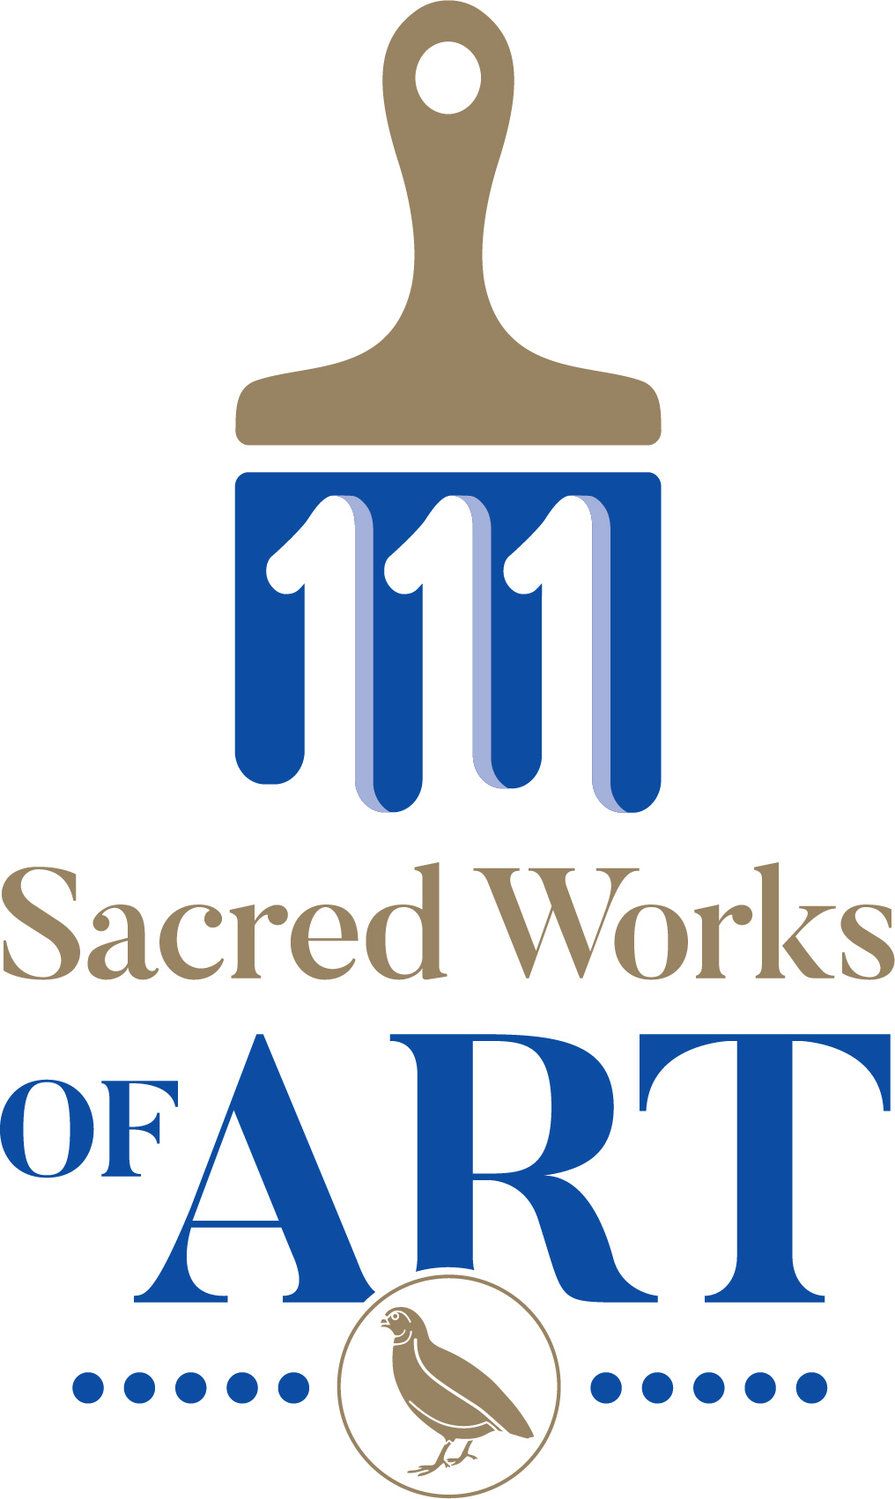 This is the logo the 111 Sacred Works of Art series appearing throughout 2922 on  Bishop W. Shawn McKnight's social media outlets.